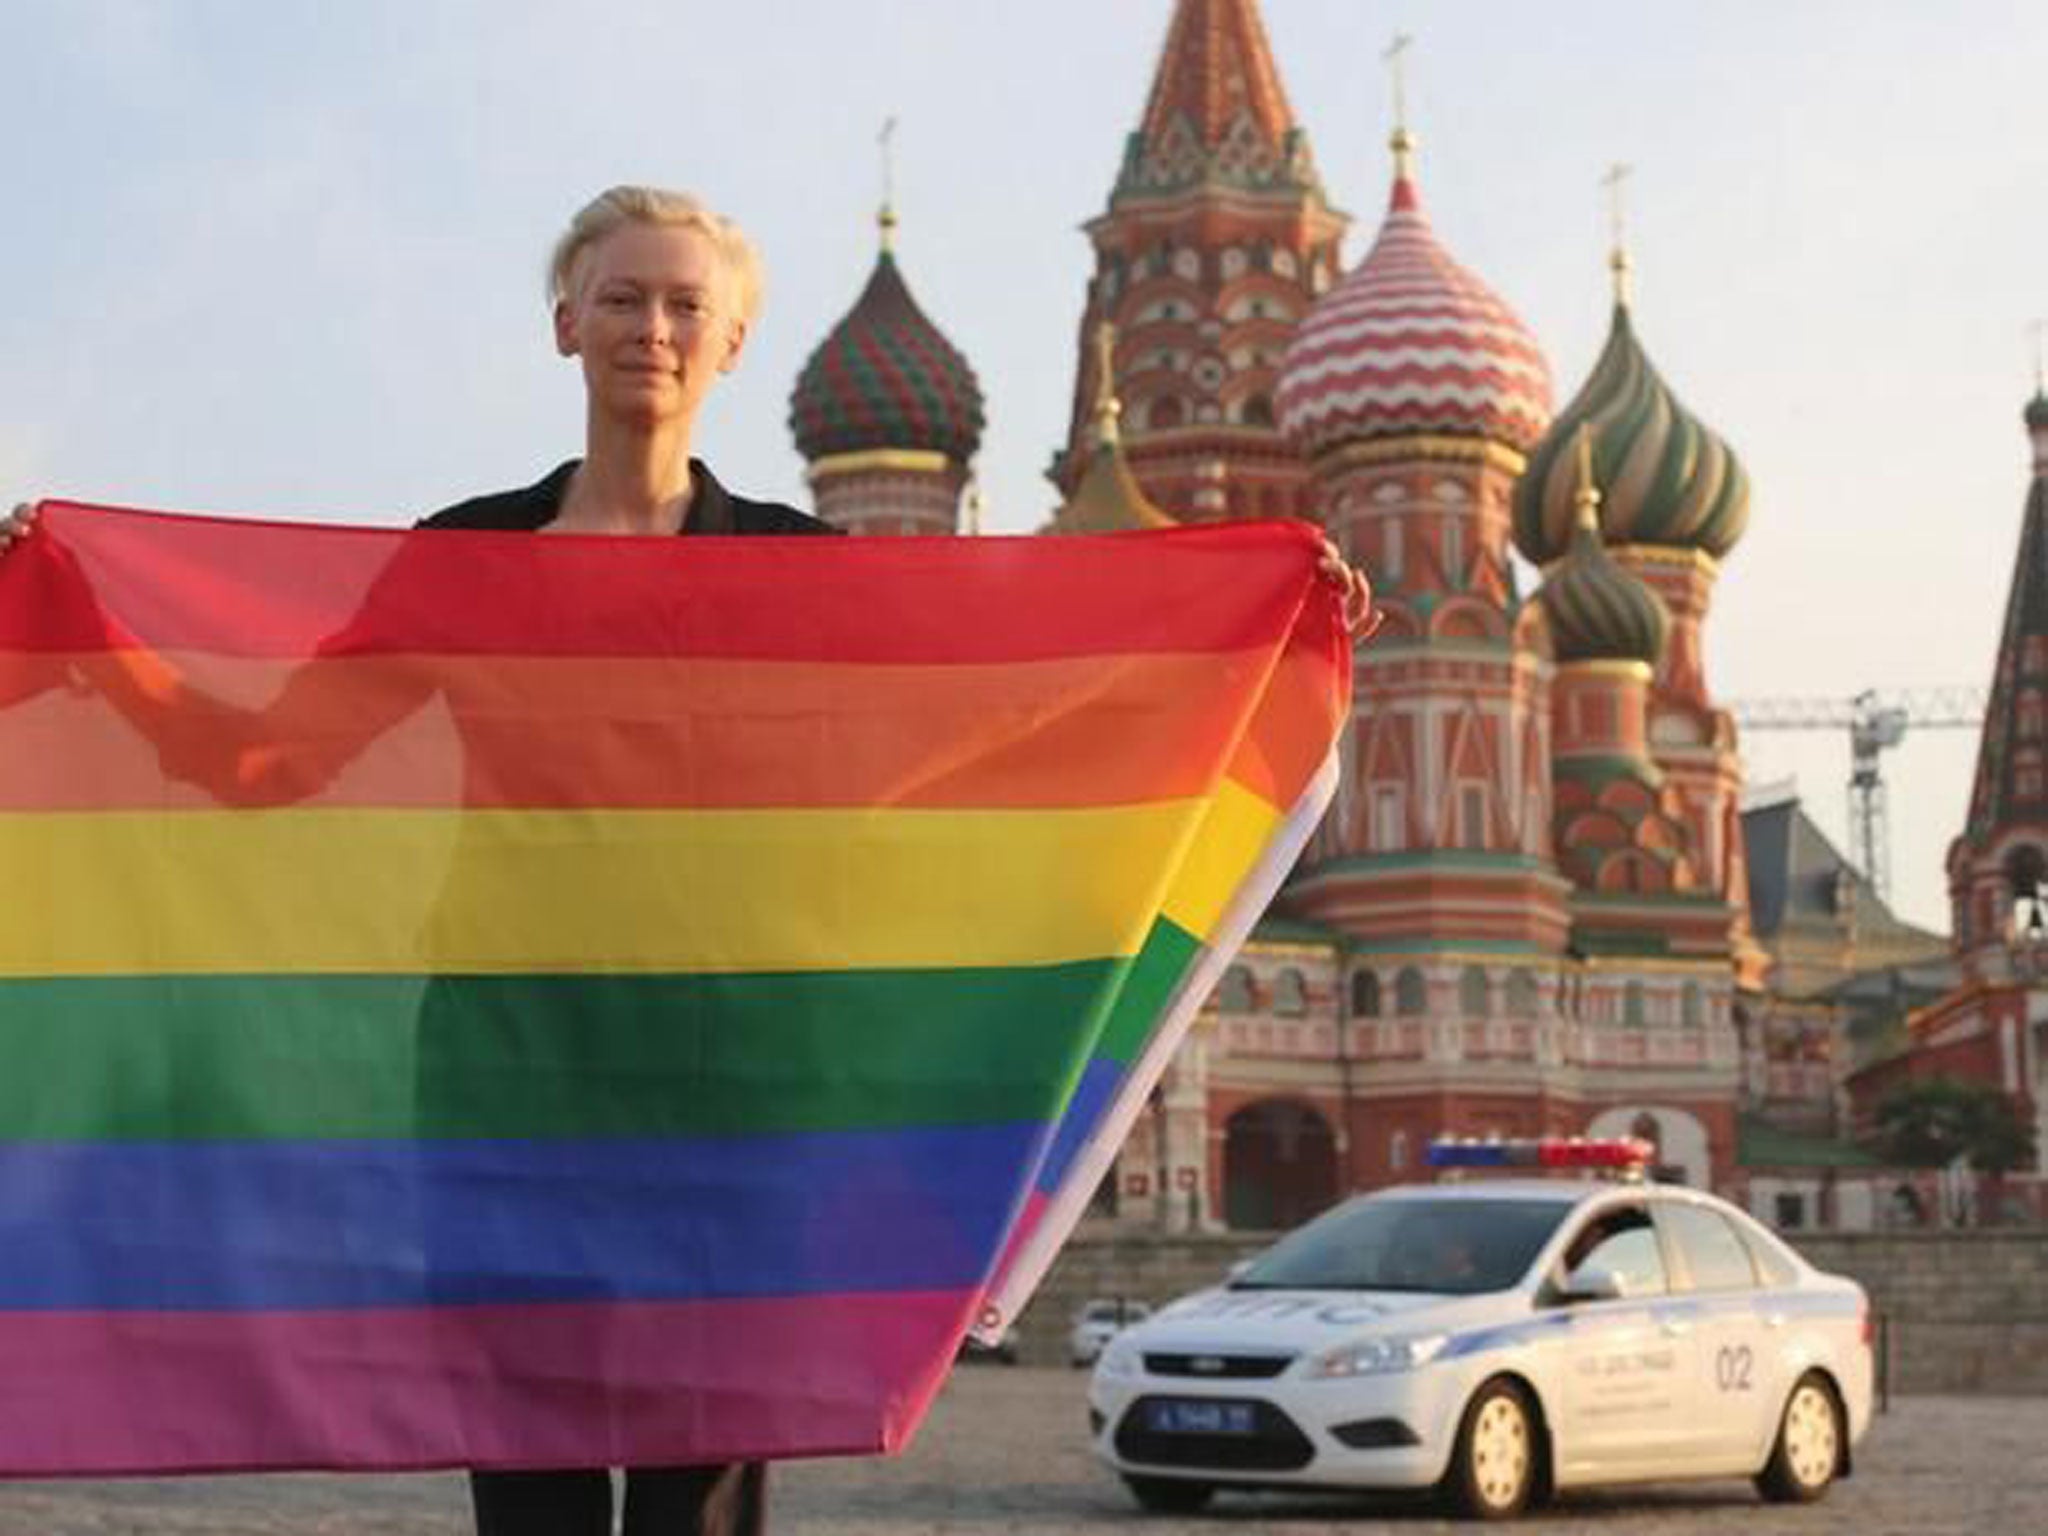 The actress Tilda Swinton has posed on Red Square with a rainbow flag in an act of support for Russia’s beleaguered gay community